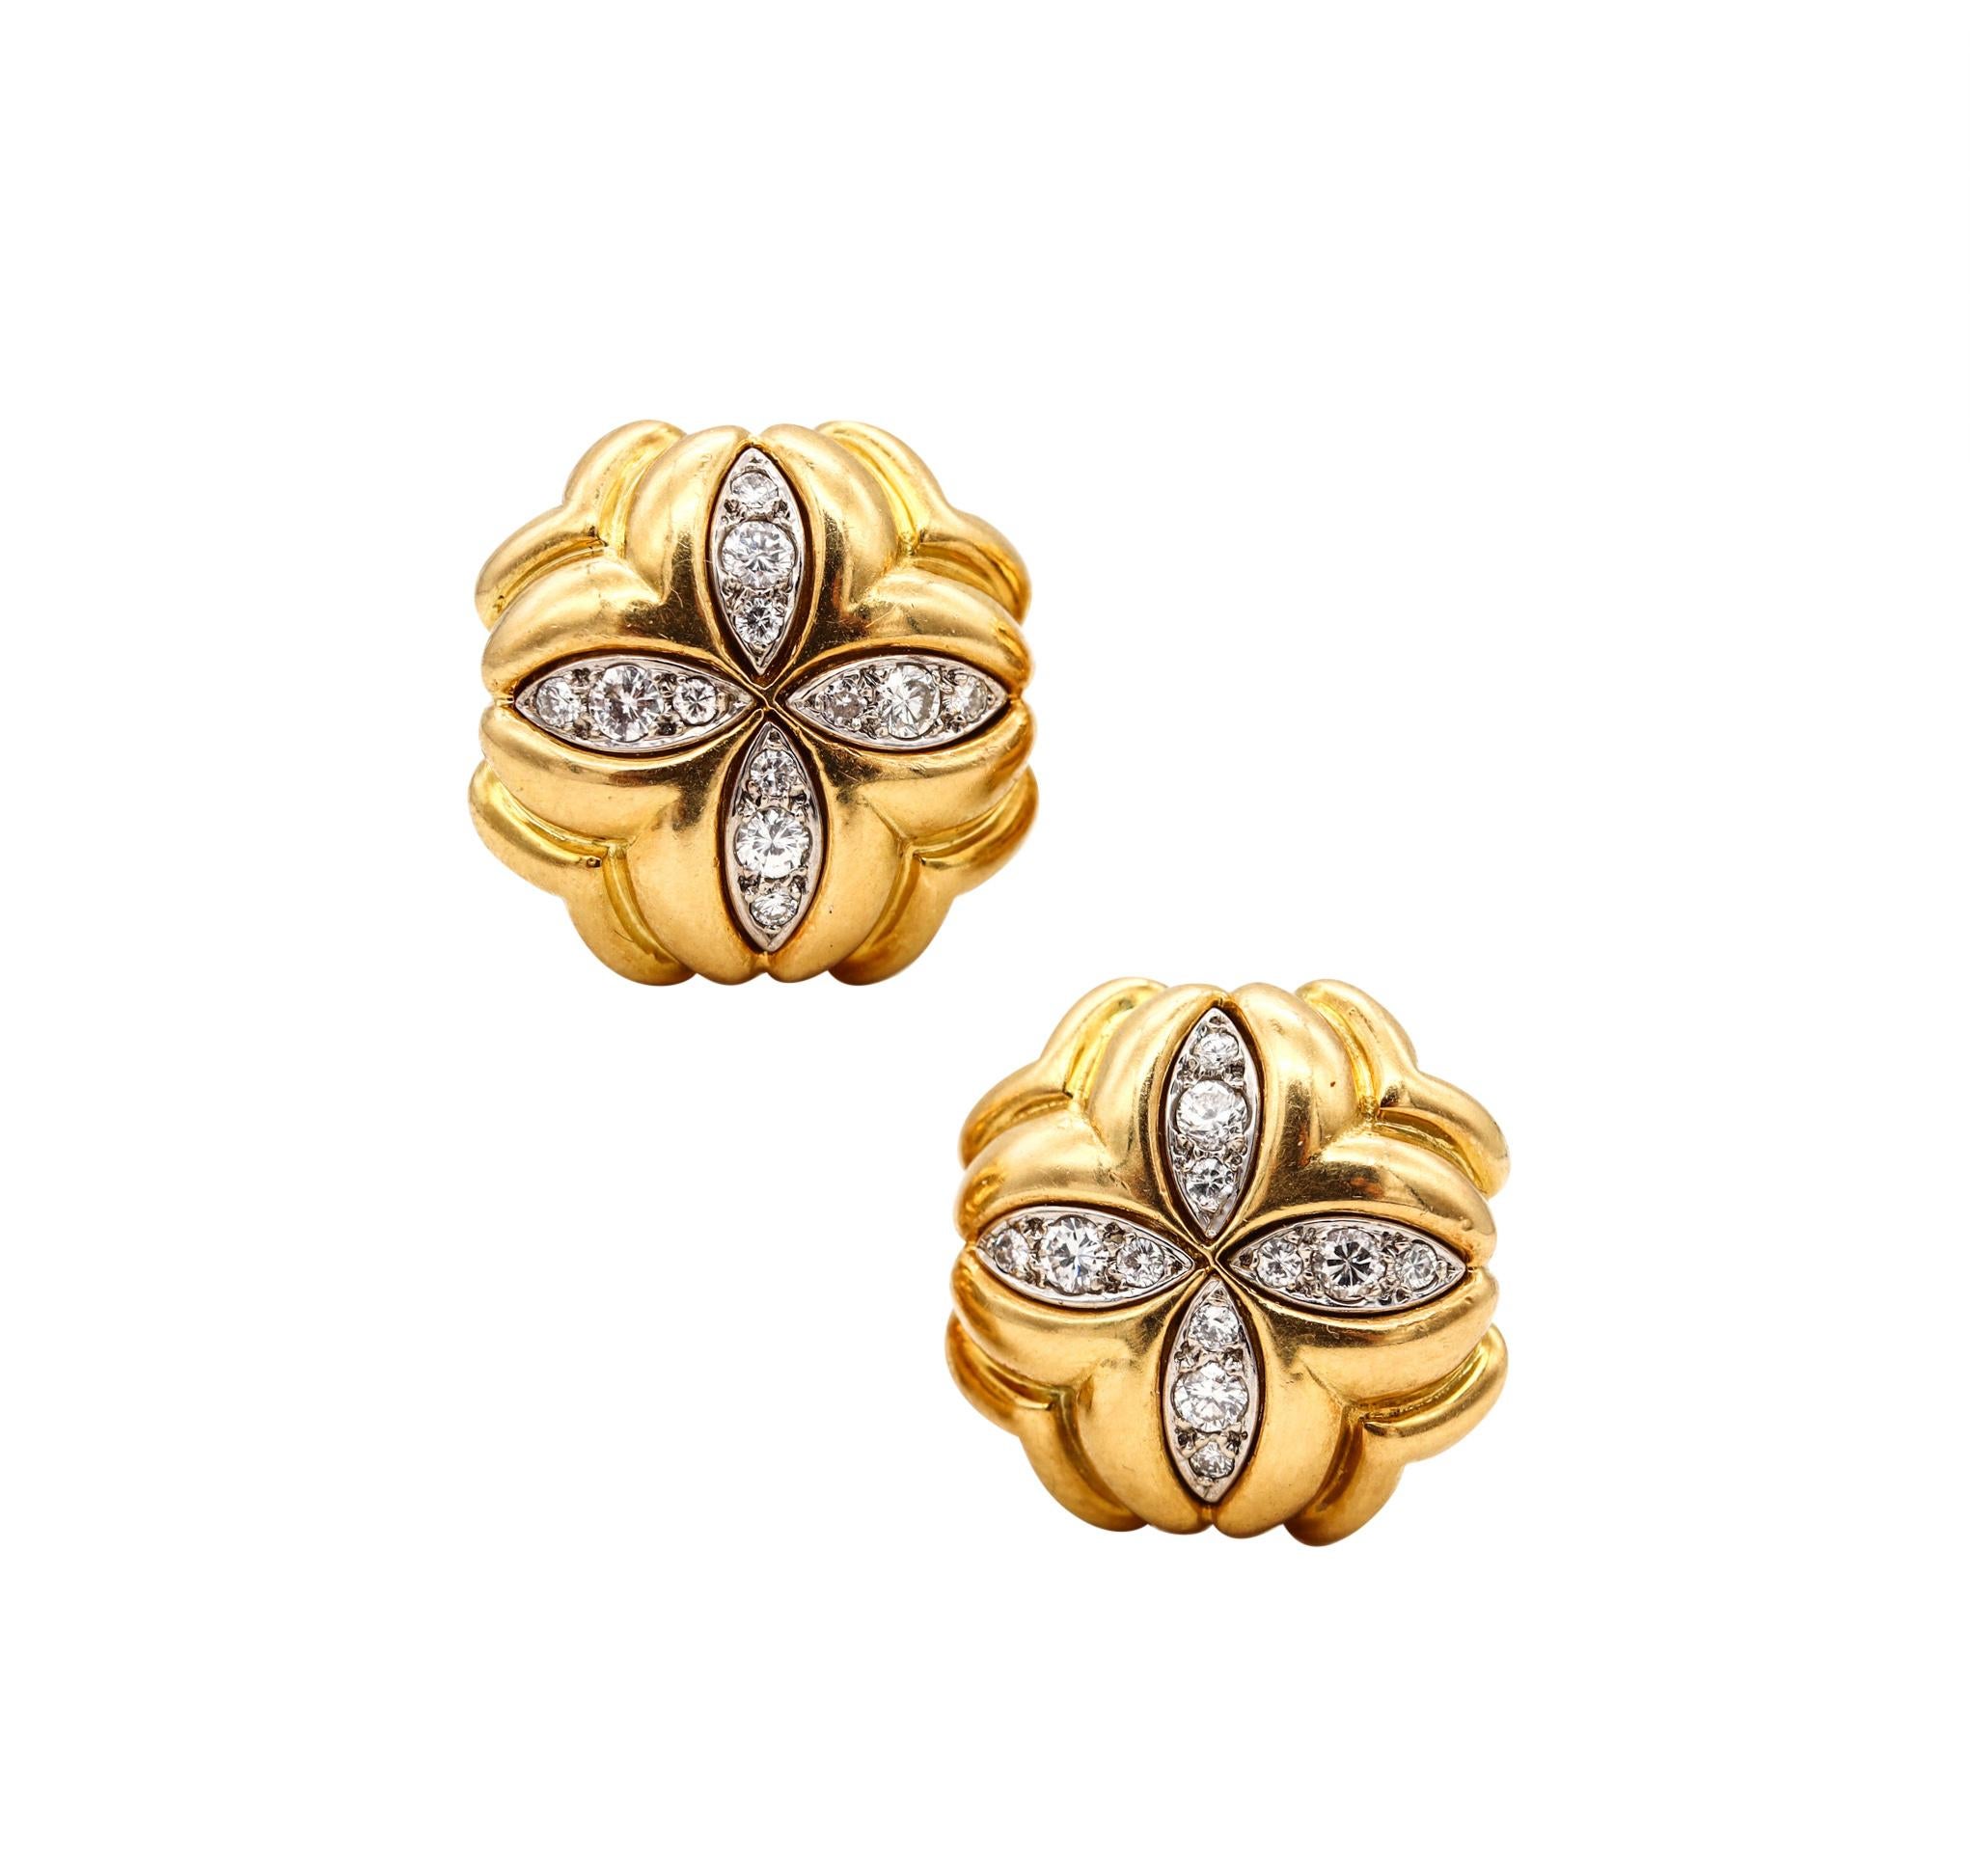 Cartier 1970 Pair of Clovers Clips Earrings in 18Kt Yellow Gold with VS Diamonds 1